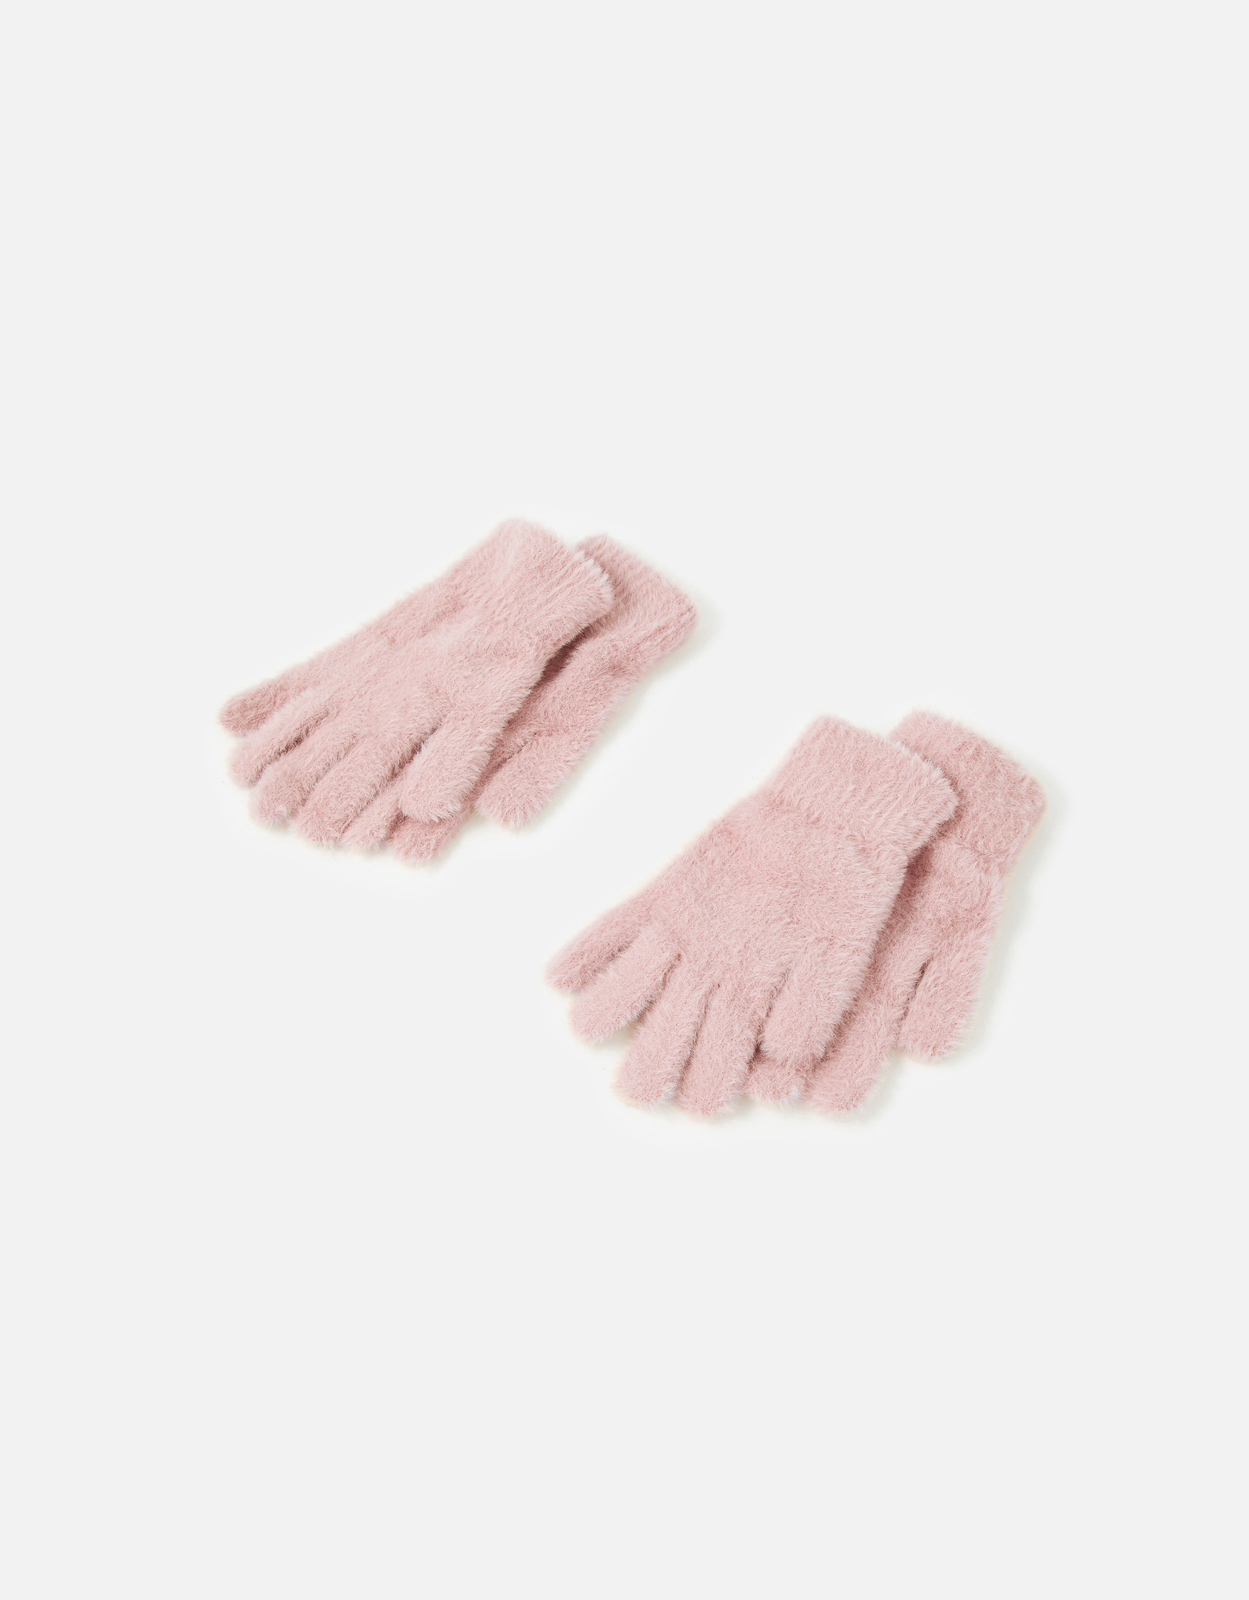 Accessorize Women's Light Pink Stretch Fluffy Glove Twinset, Size: One Size